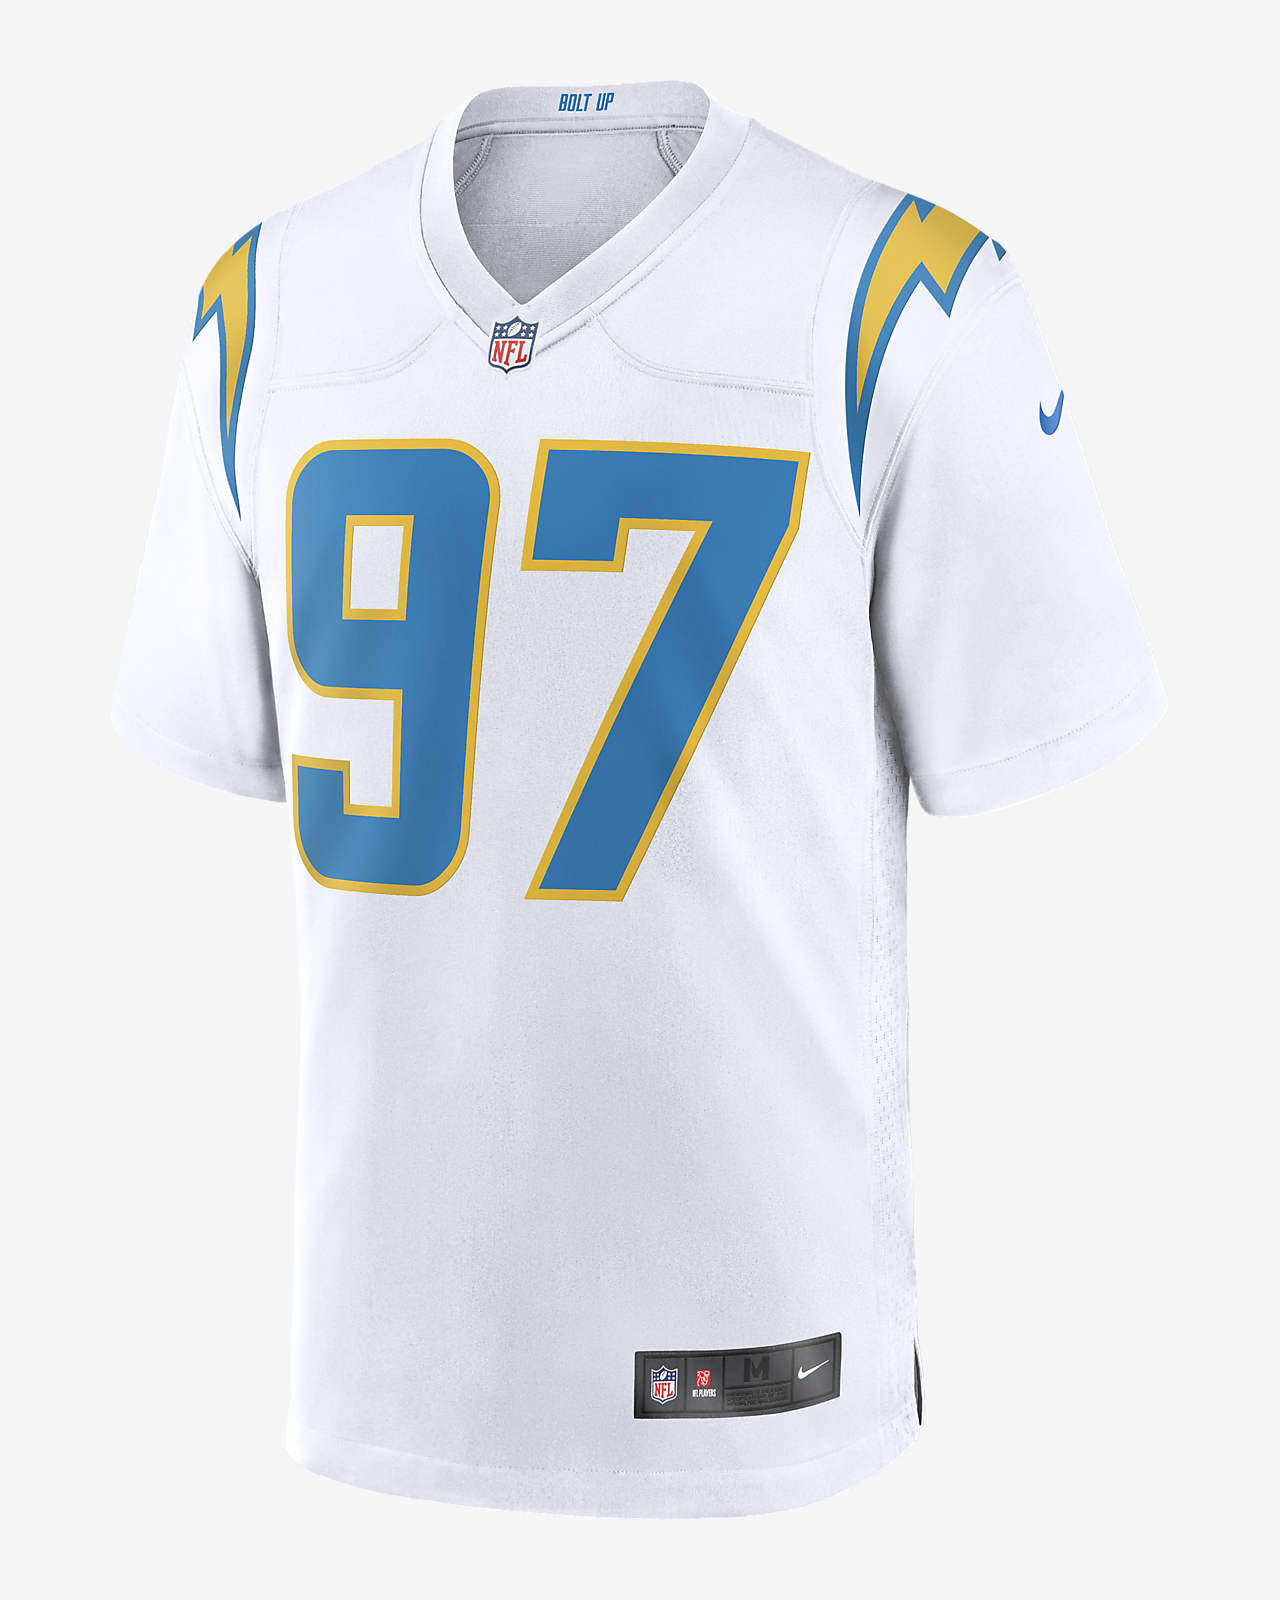 nfl chargers shirts